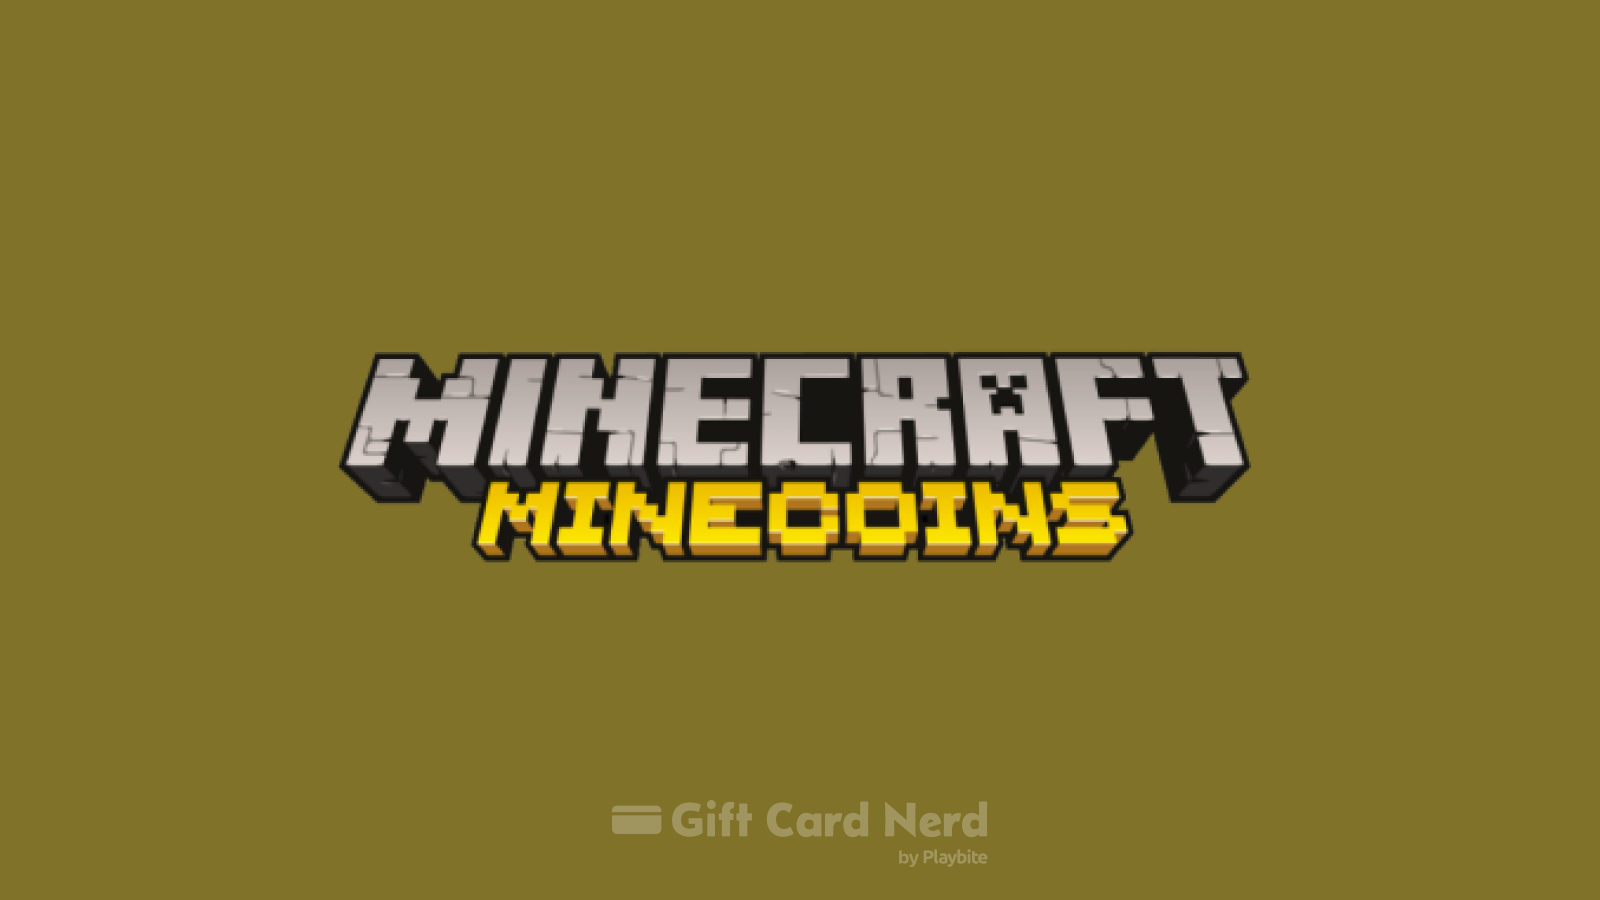 Does Amazon Sell Minecraft Gift Cards?